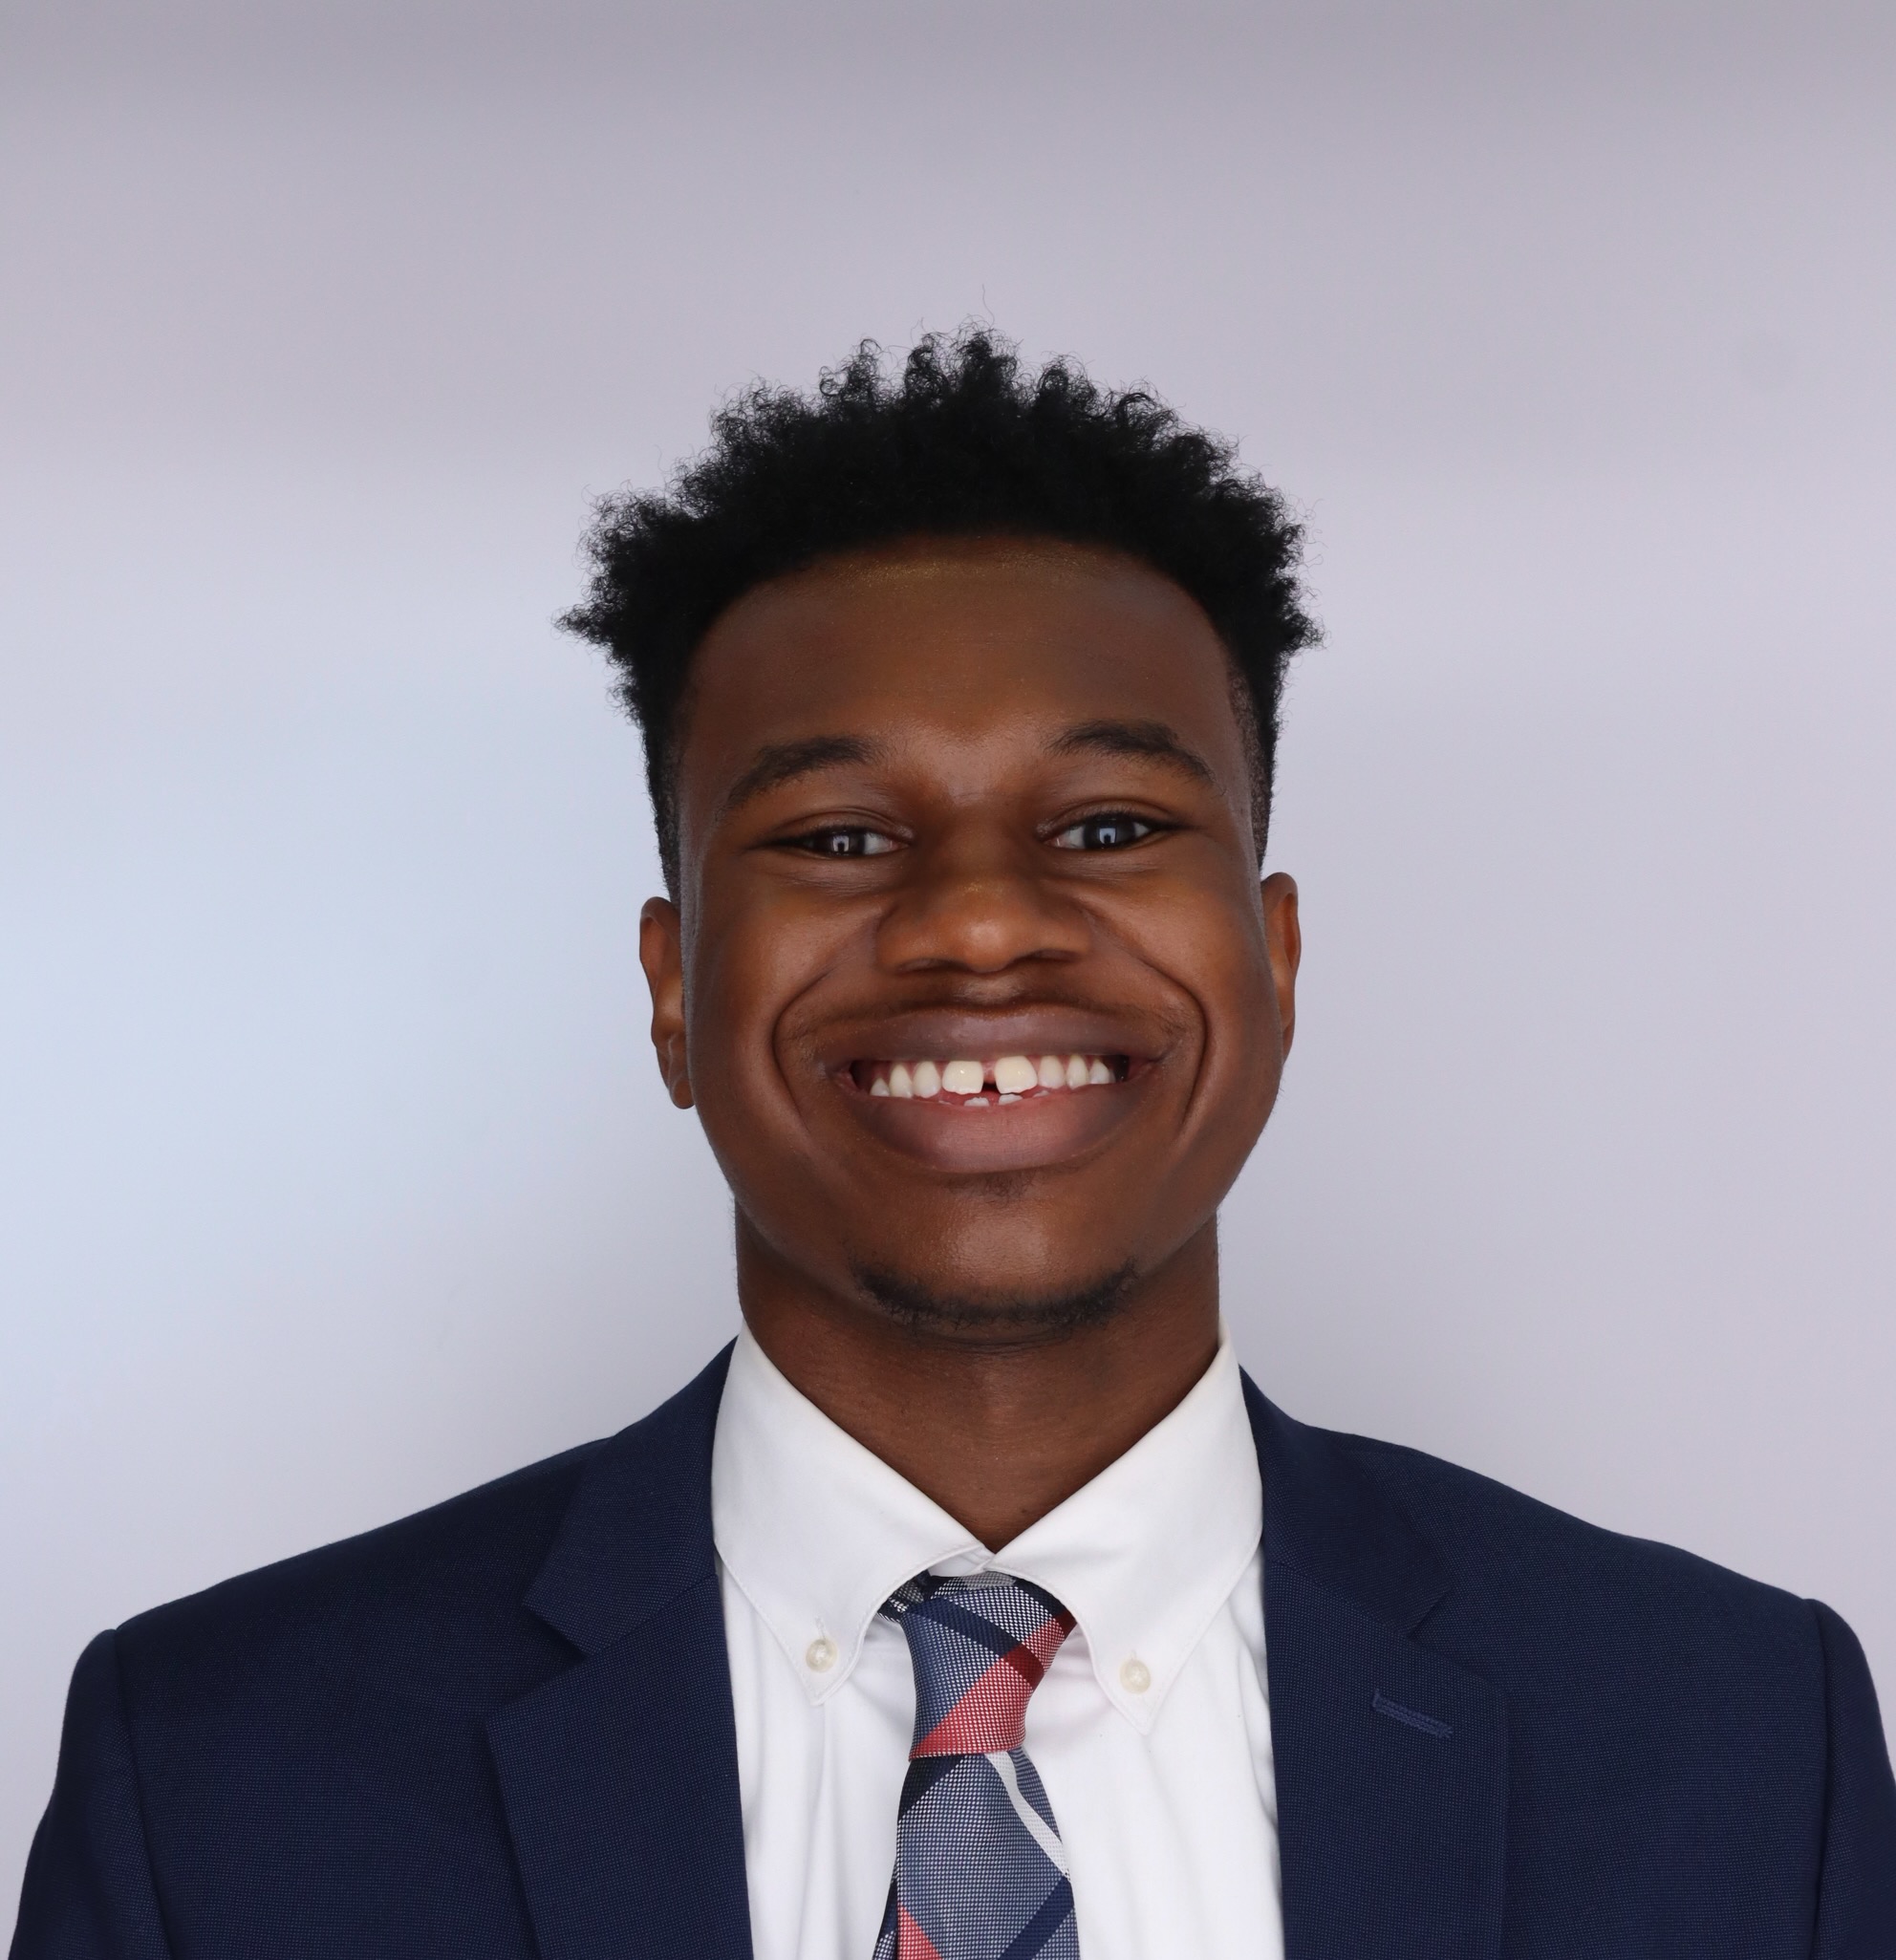 Finance major Jaden Spady '24 serves as a WMSURE fellow and researches the impact of financial education on youth. (courtesy Jaden Spady)